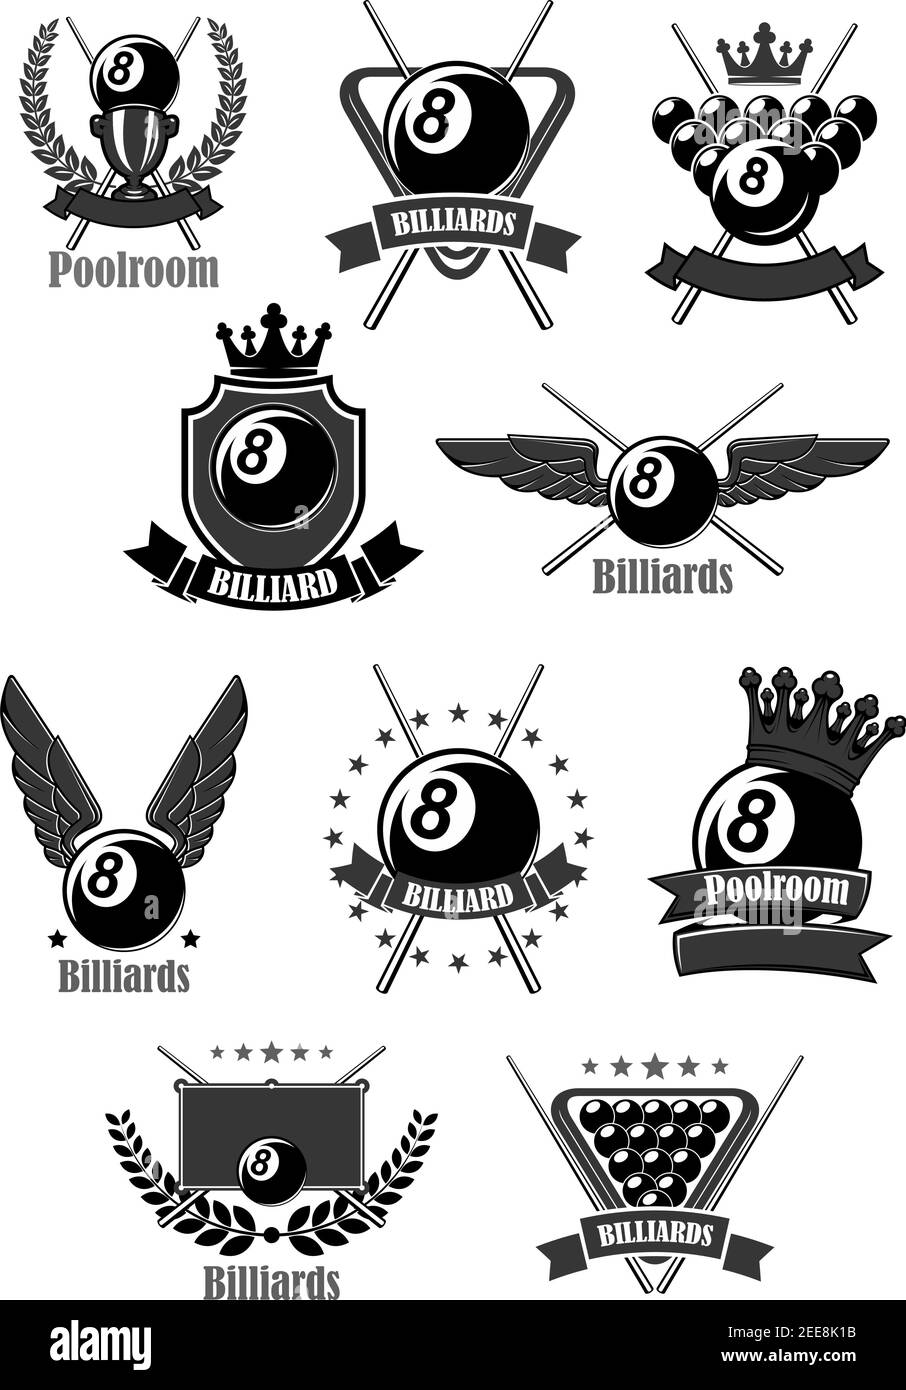 Billiards club or poolroom sport game vector icons set. Badges for pool play championship awards or contest tournament with symbols of cues and balls, Stock Vector